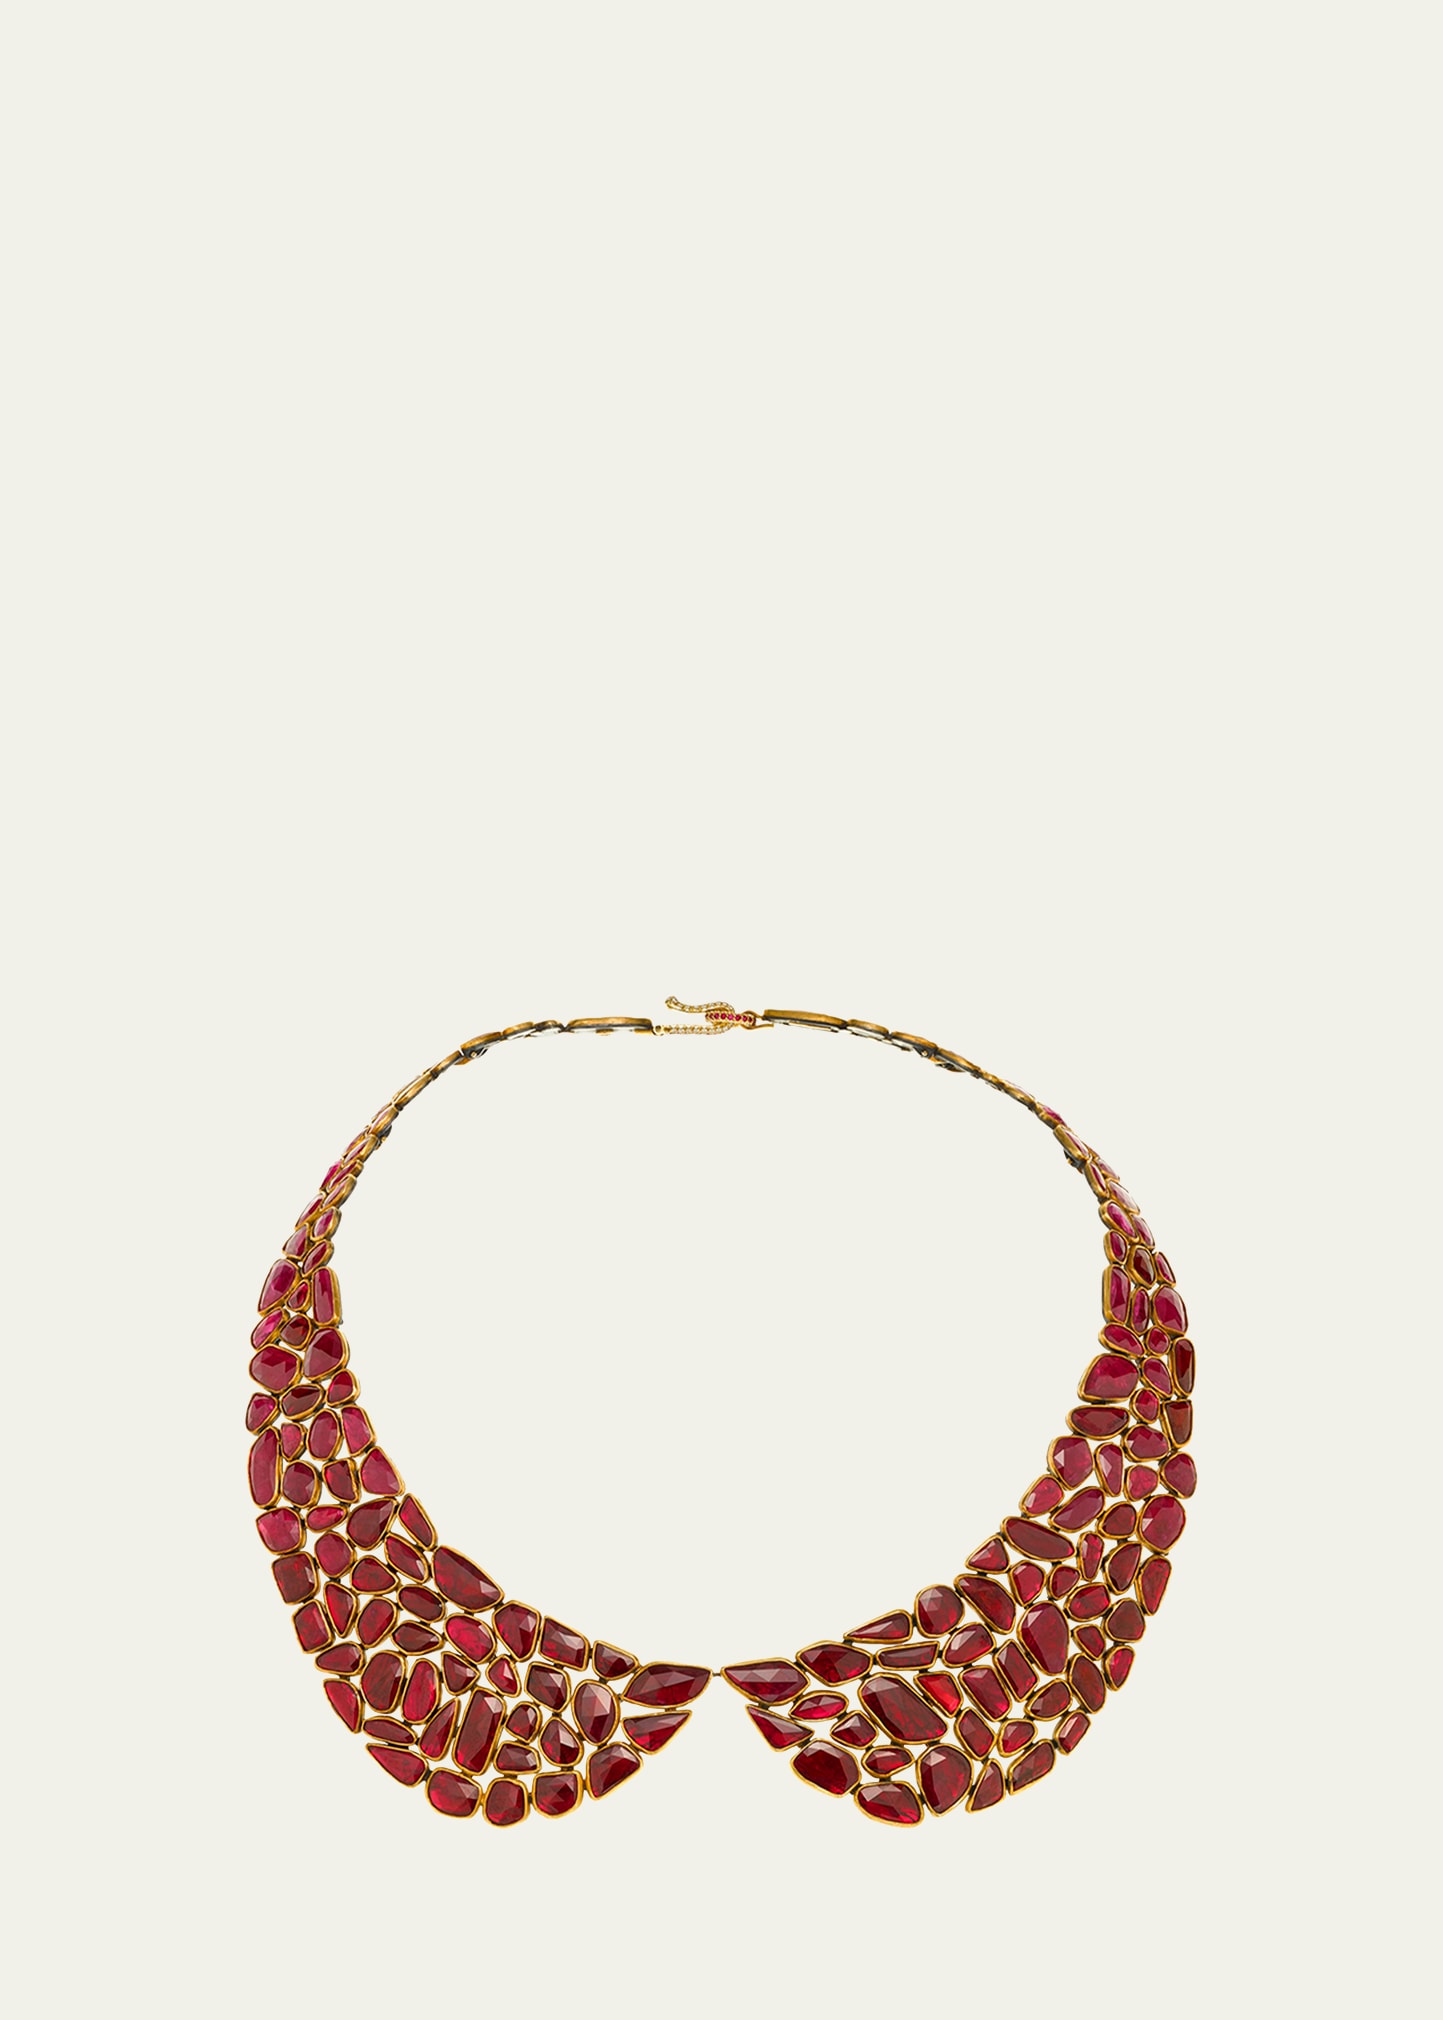 JUDY GEIB Peter Pan Collar Brilliant Ruby Necklace